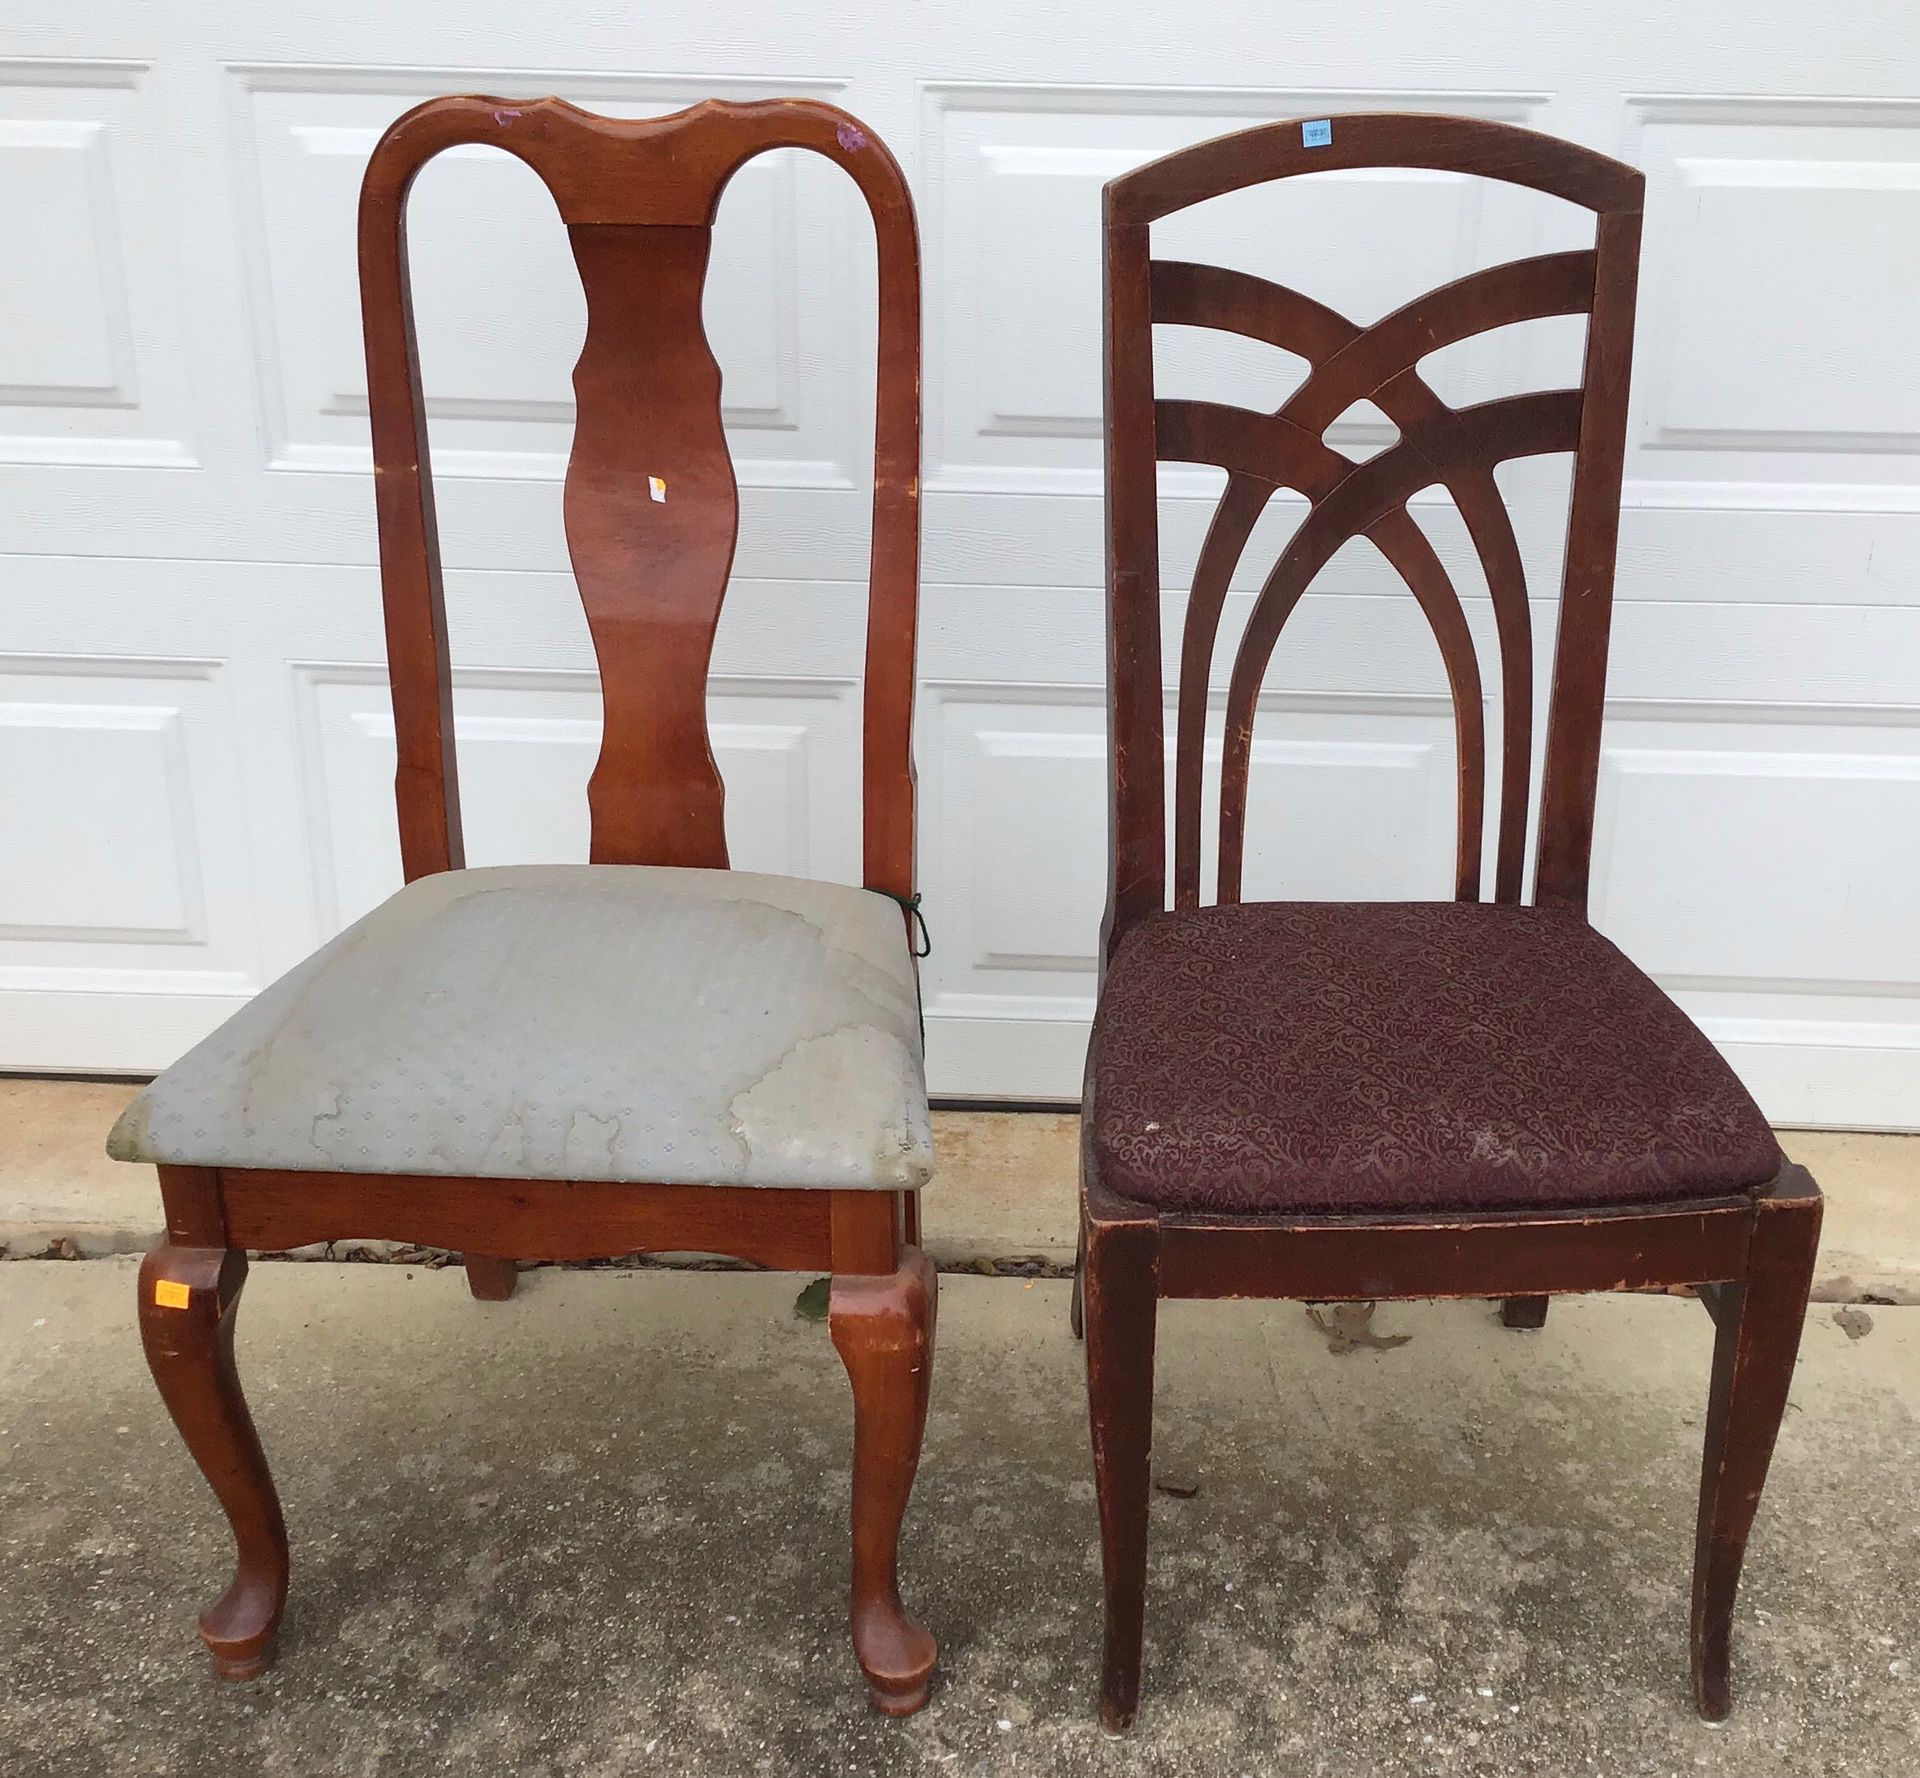 Lone Wood Queen Anne Dining Chair and Vintage Crisscrossed Wood Dining Chair